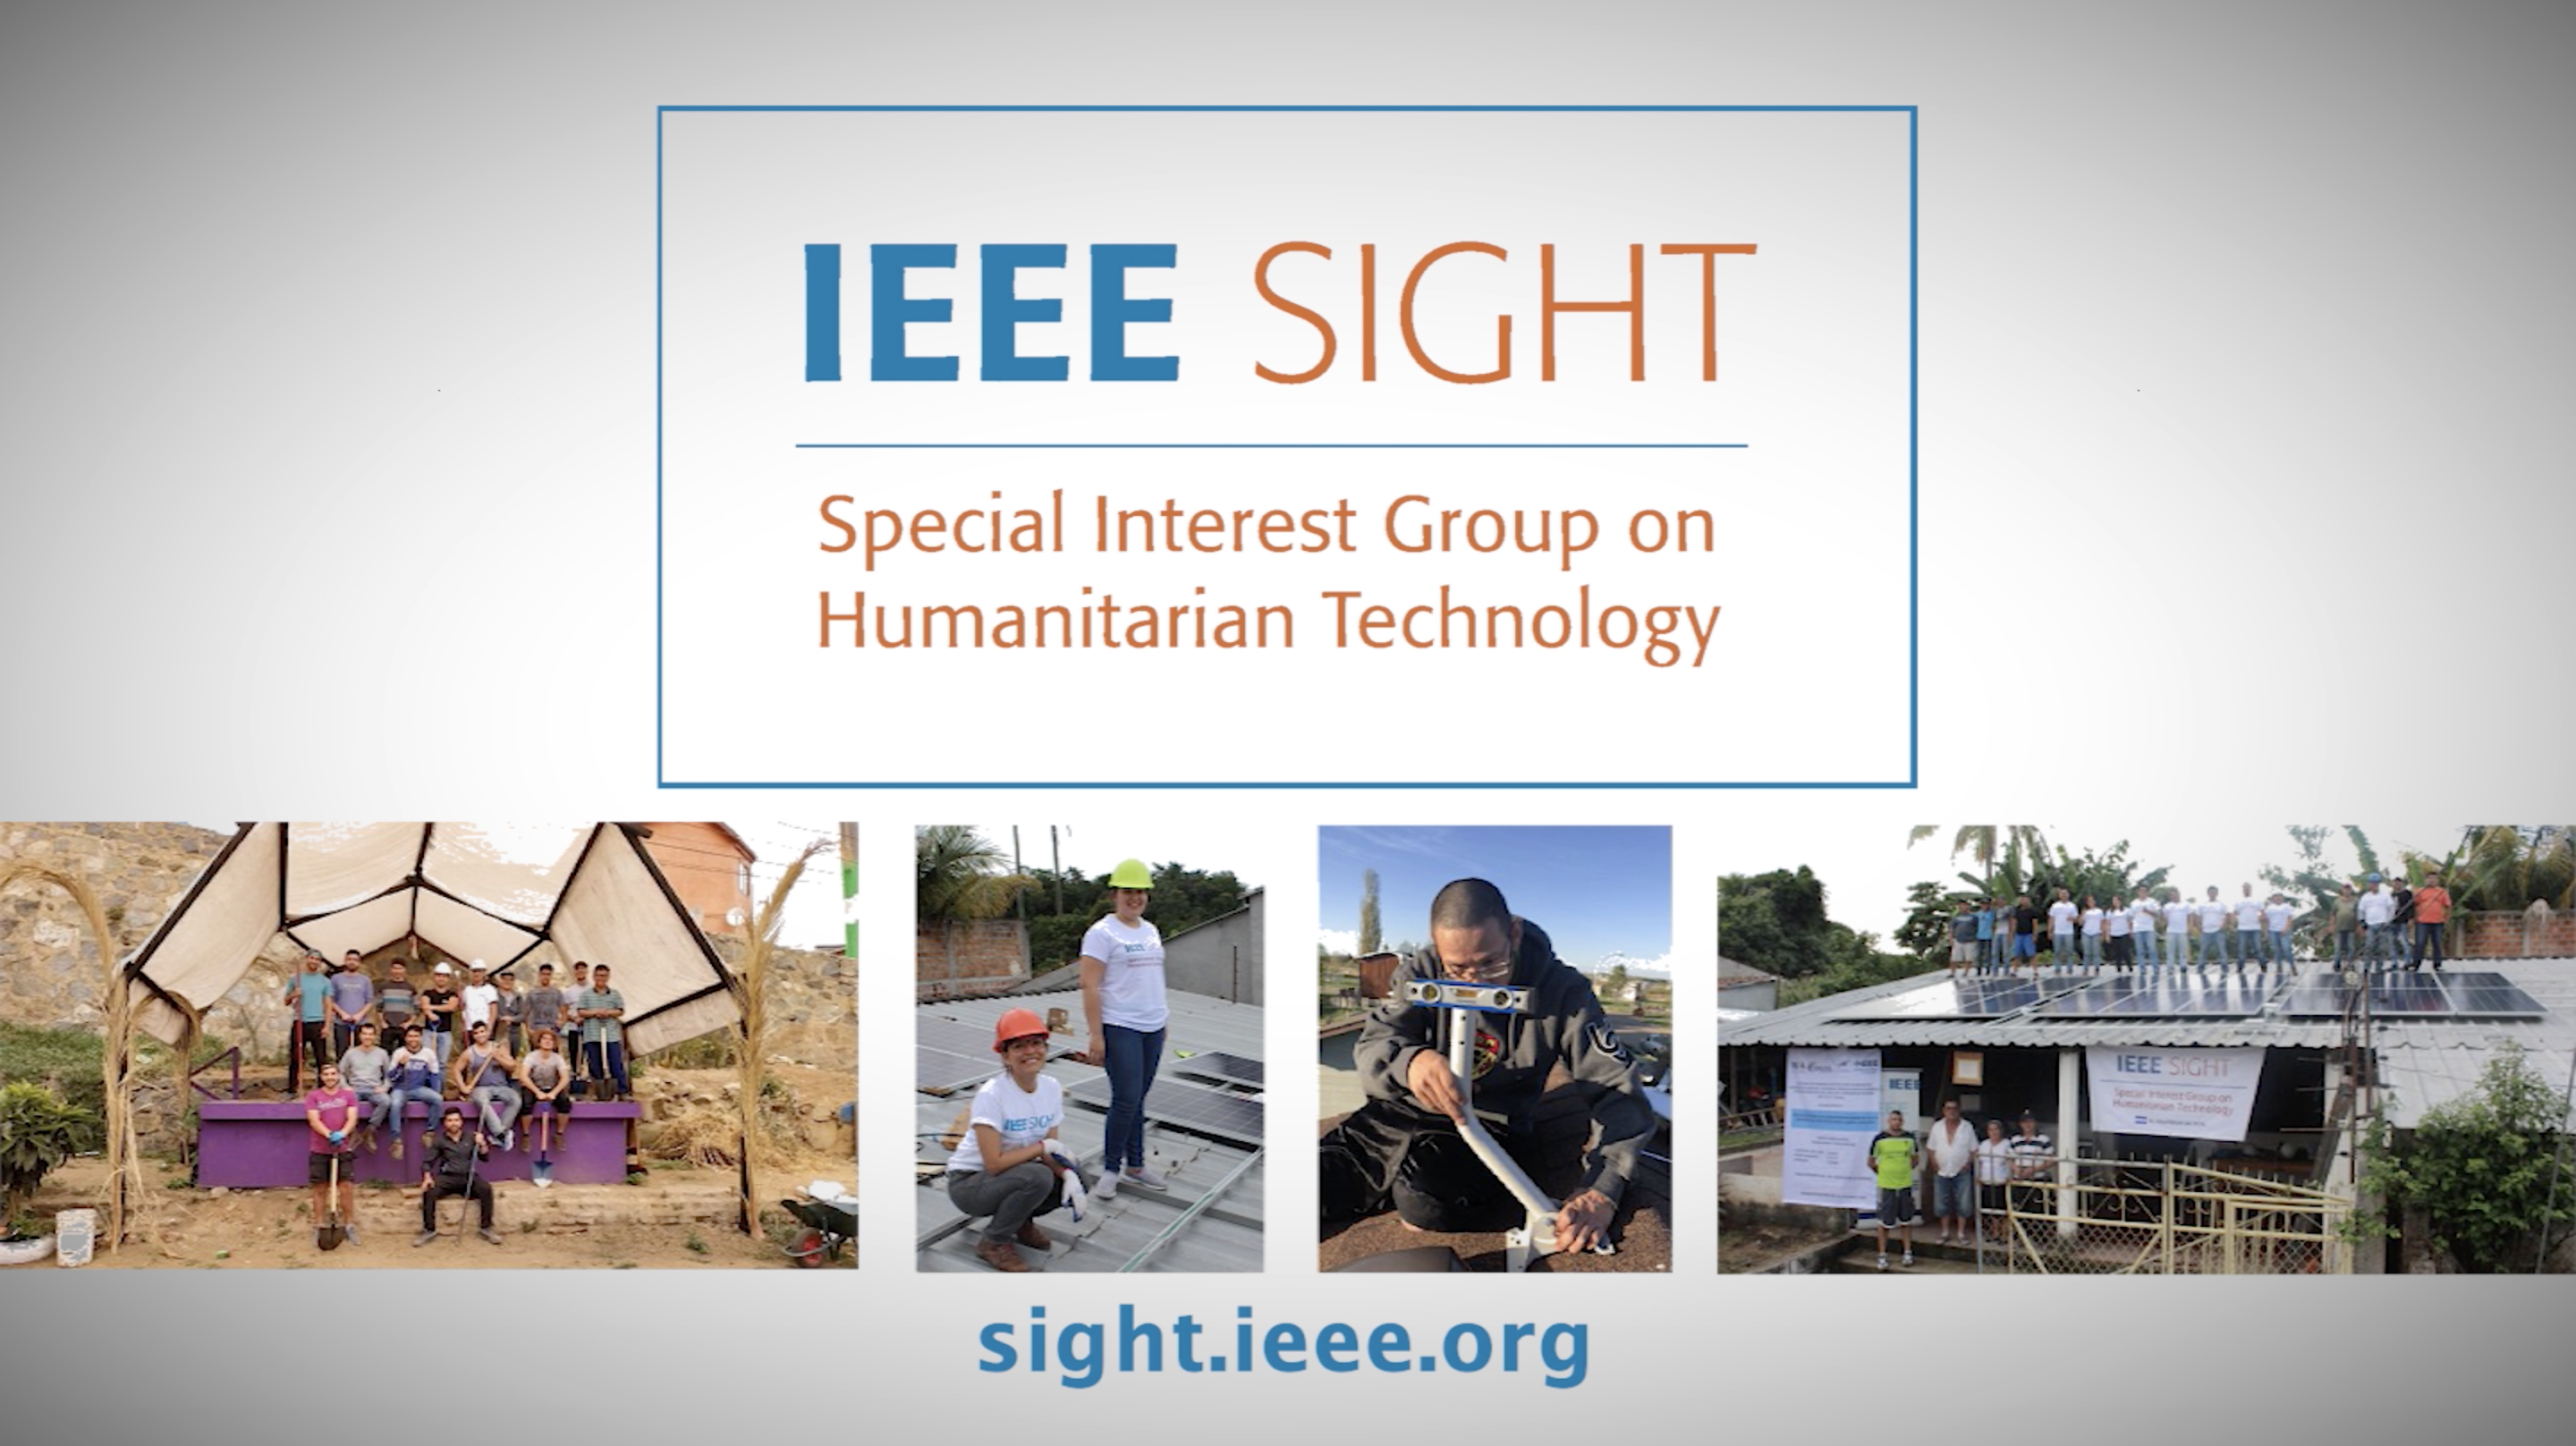 IEEE SIGHT in 2021: New Challenges, Same Mission